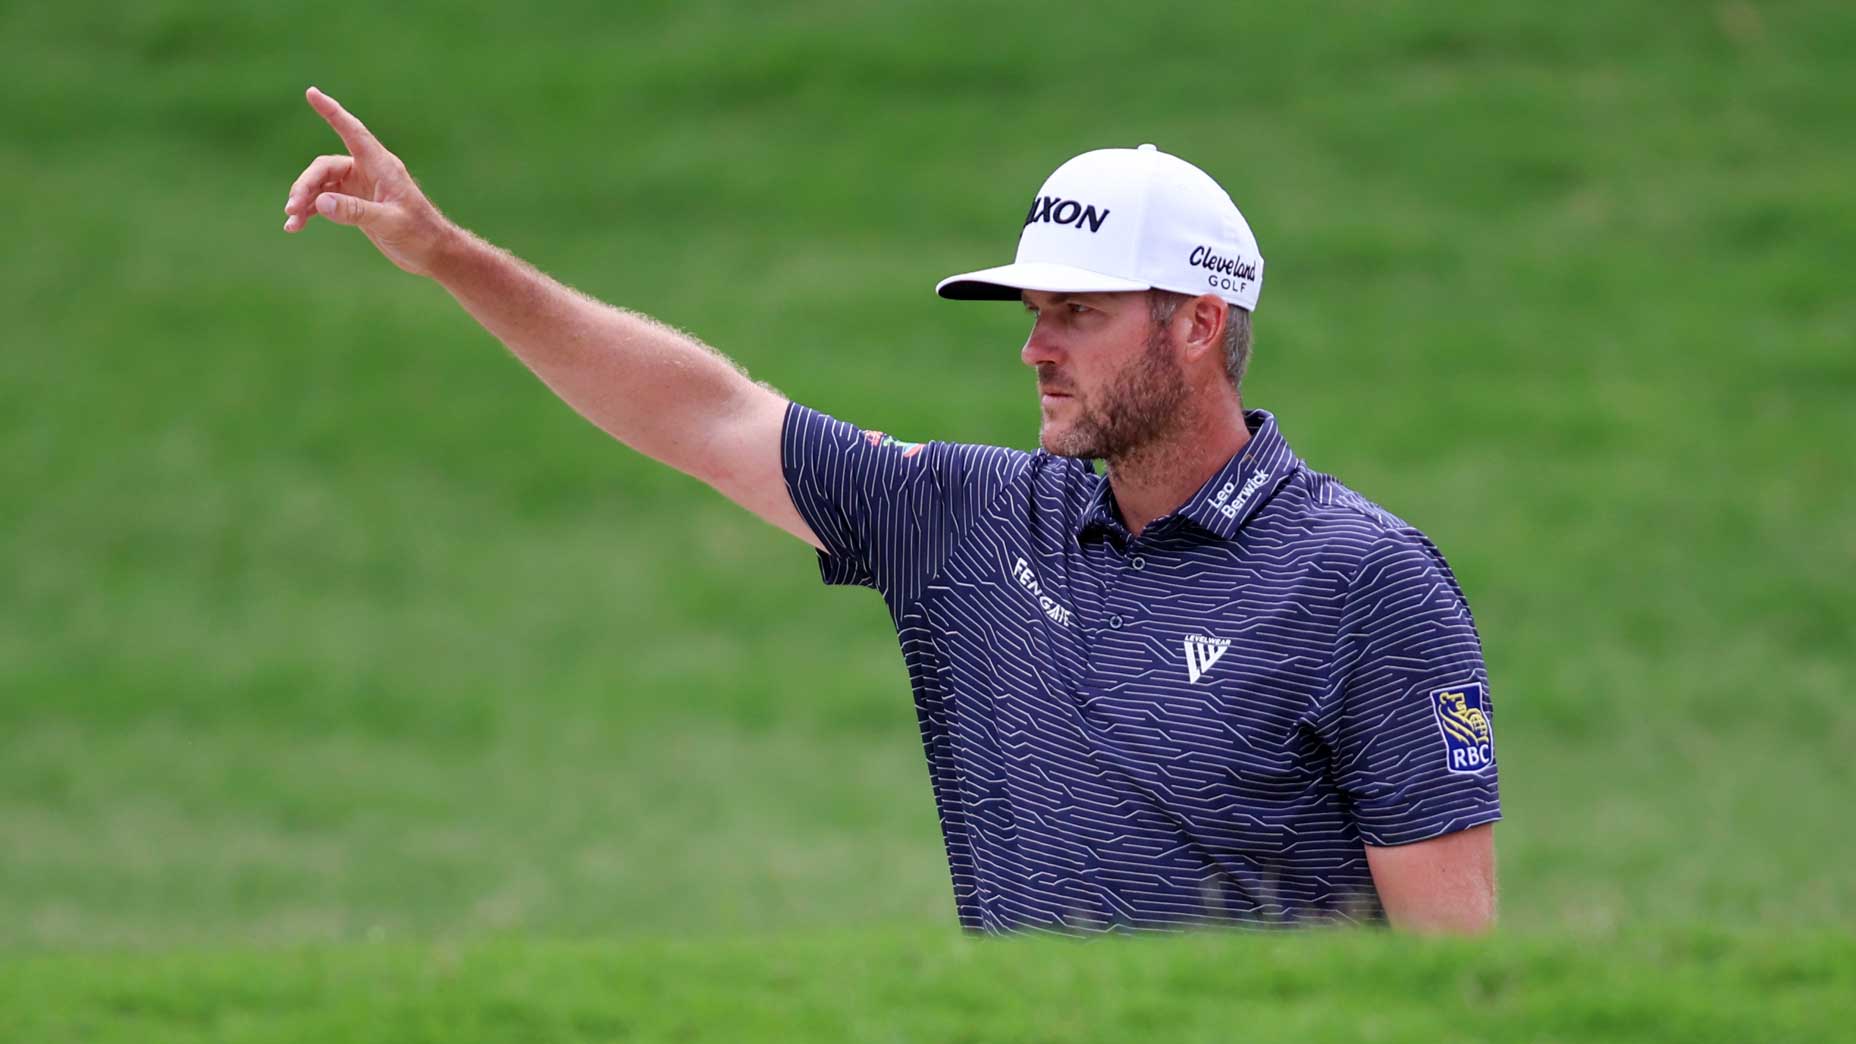 Taylor Pendrith celebrates a made shot at the CJ Cup Byron Nelson.